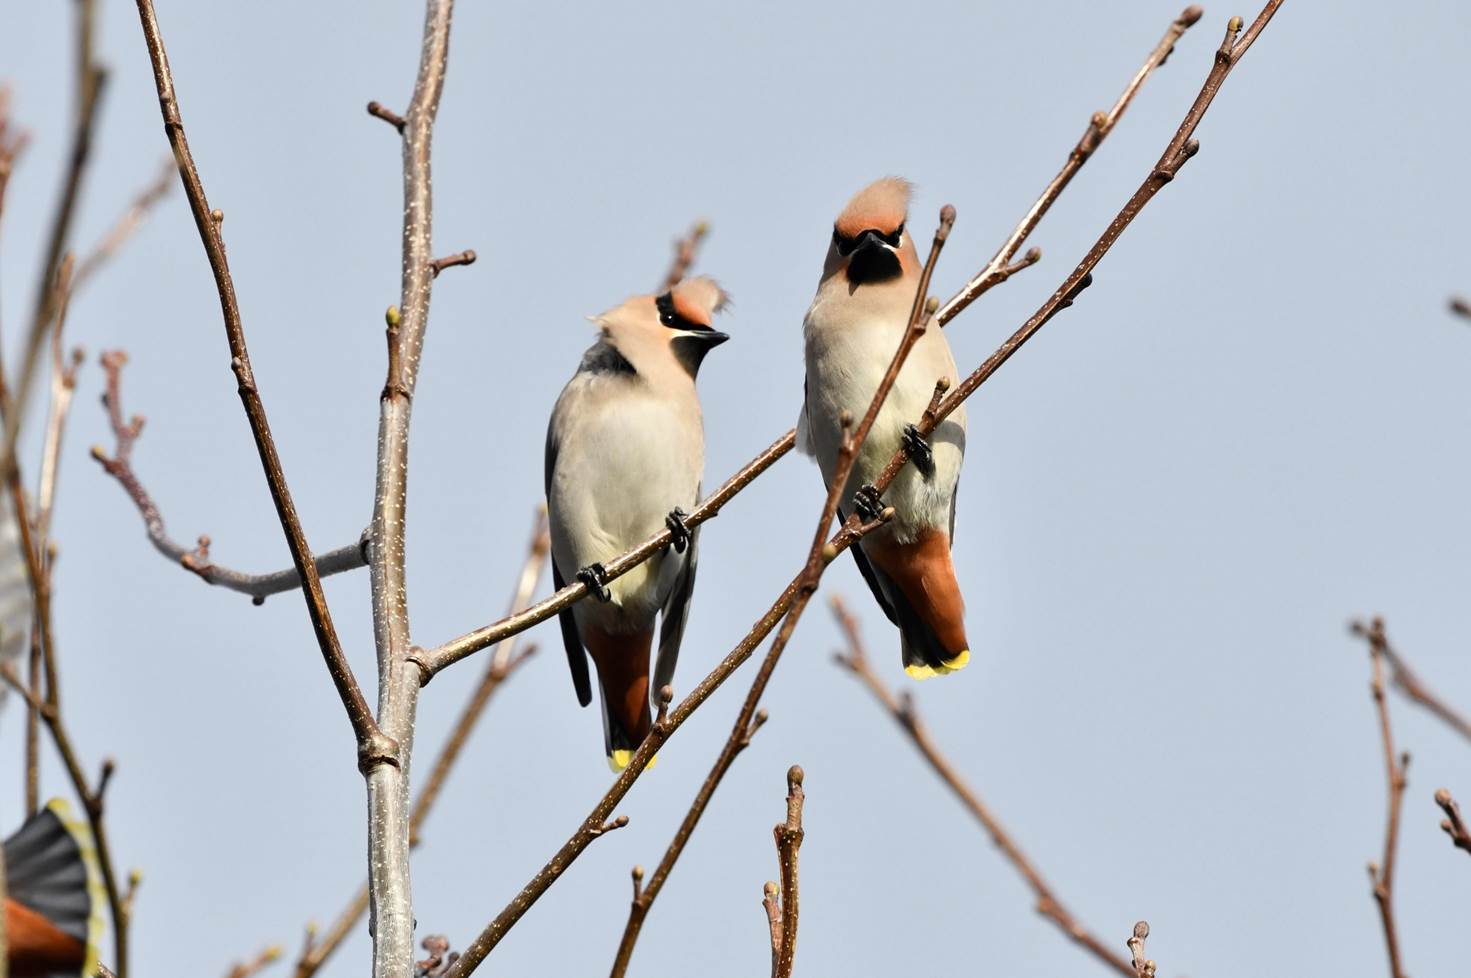 Two birds sitting on a branch

Description automatically generated